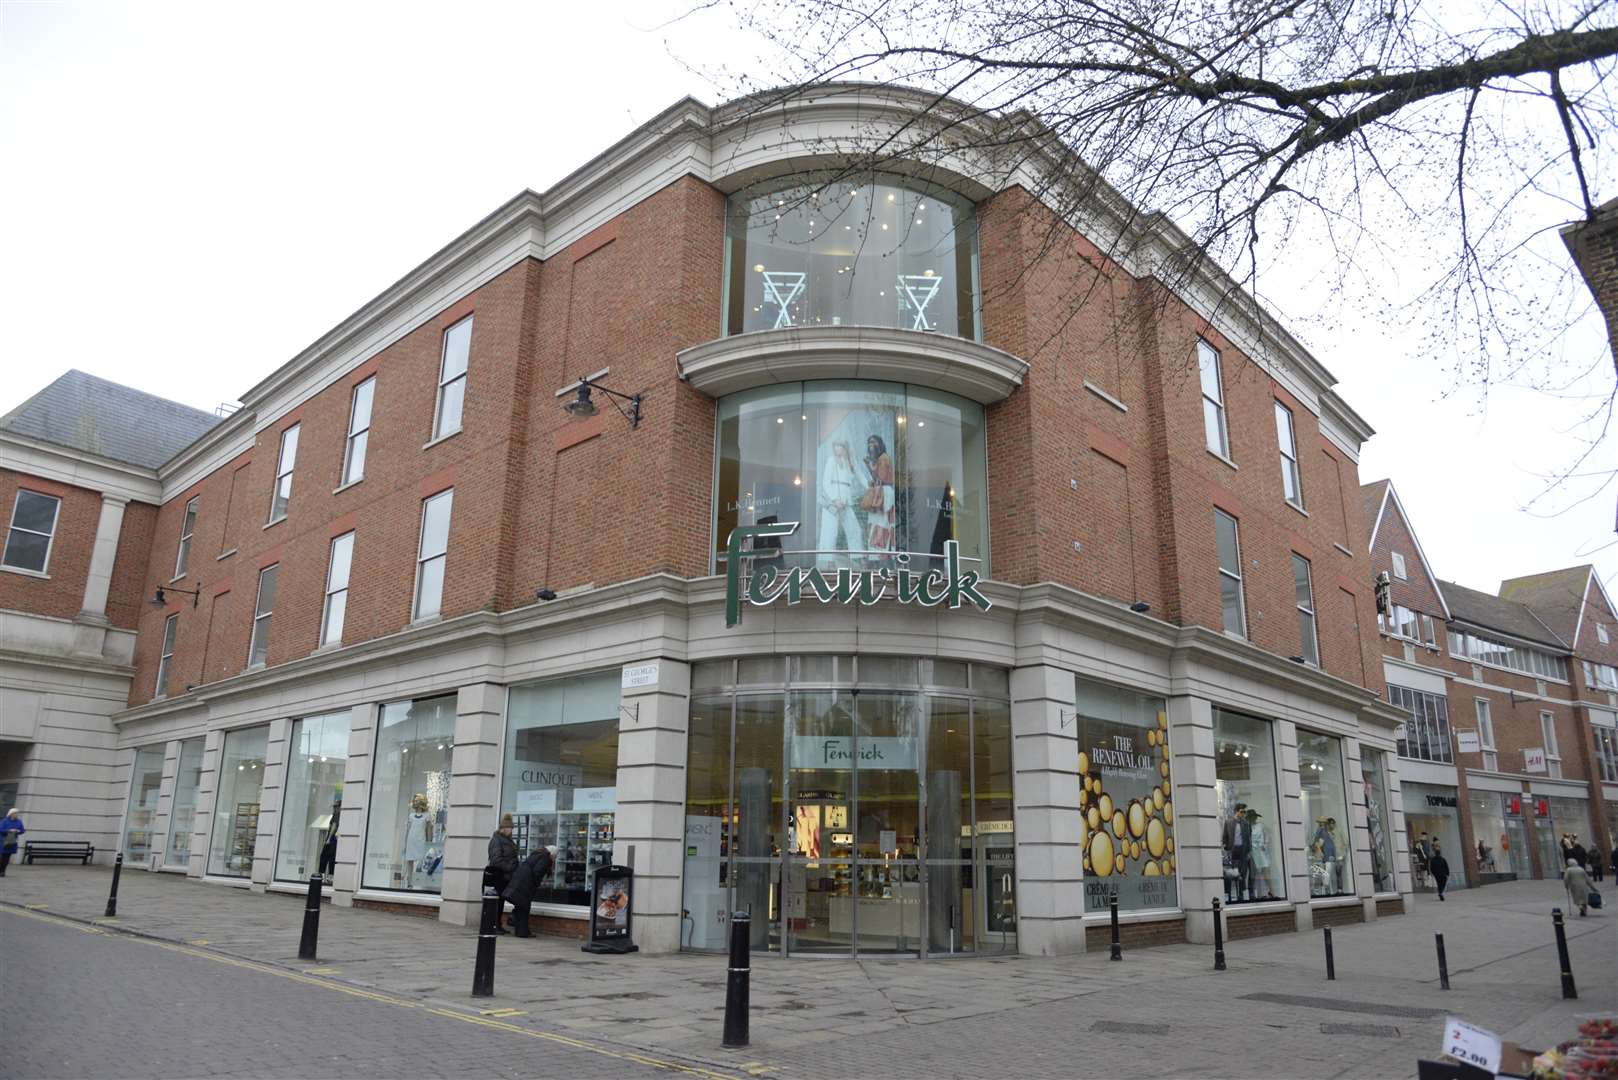 Fenwick is one of the centre's anchor stores